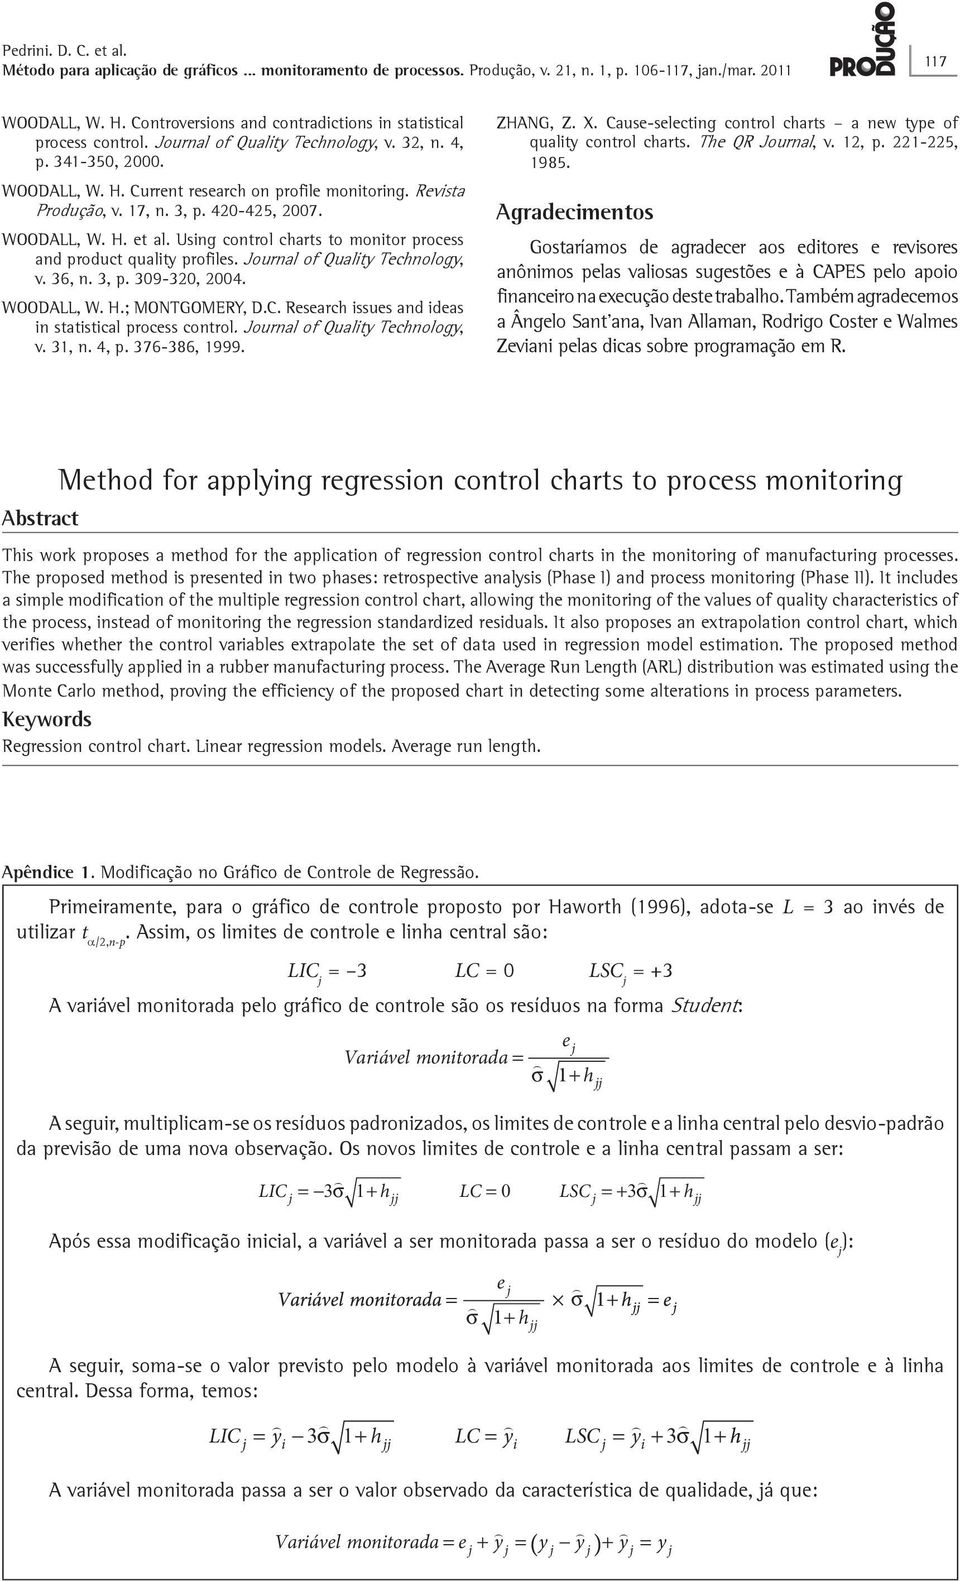 MONTGOMERY, DC Research ssues and deas n statstcal process control Journal of Qualty Technology, v 31, n 4, p 376-386, 1999 ZHANG, Z X Cause-selectng control charts a new type of qualty control